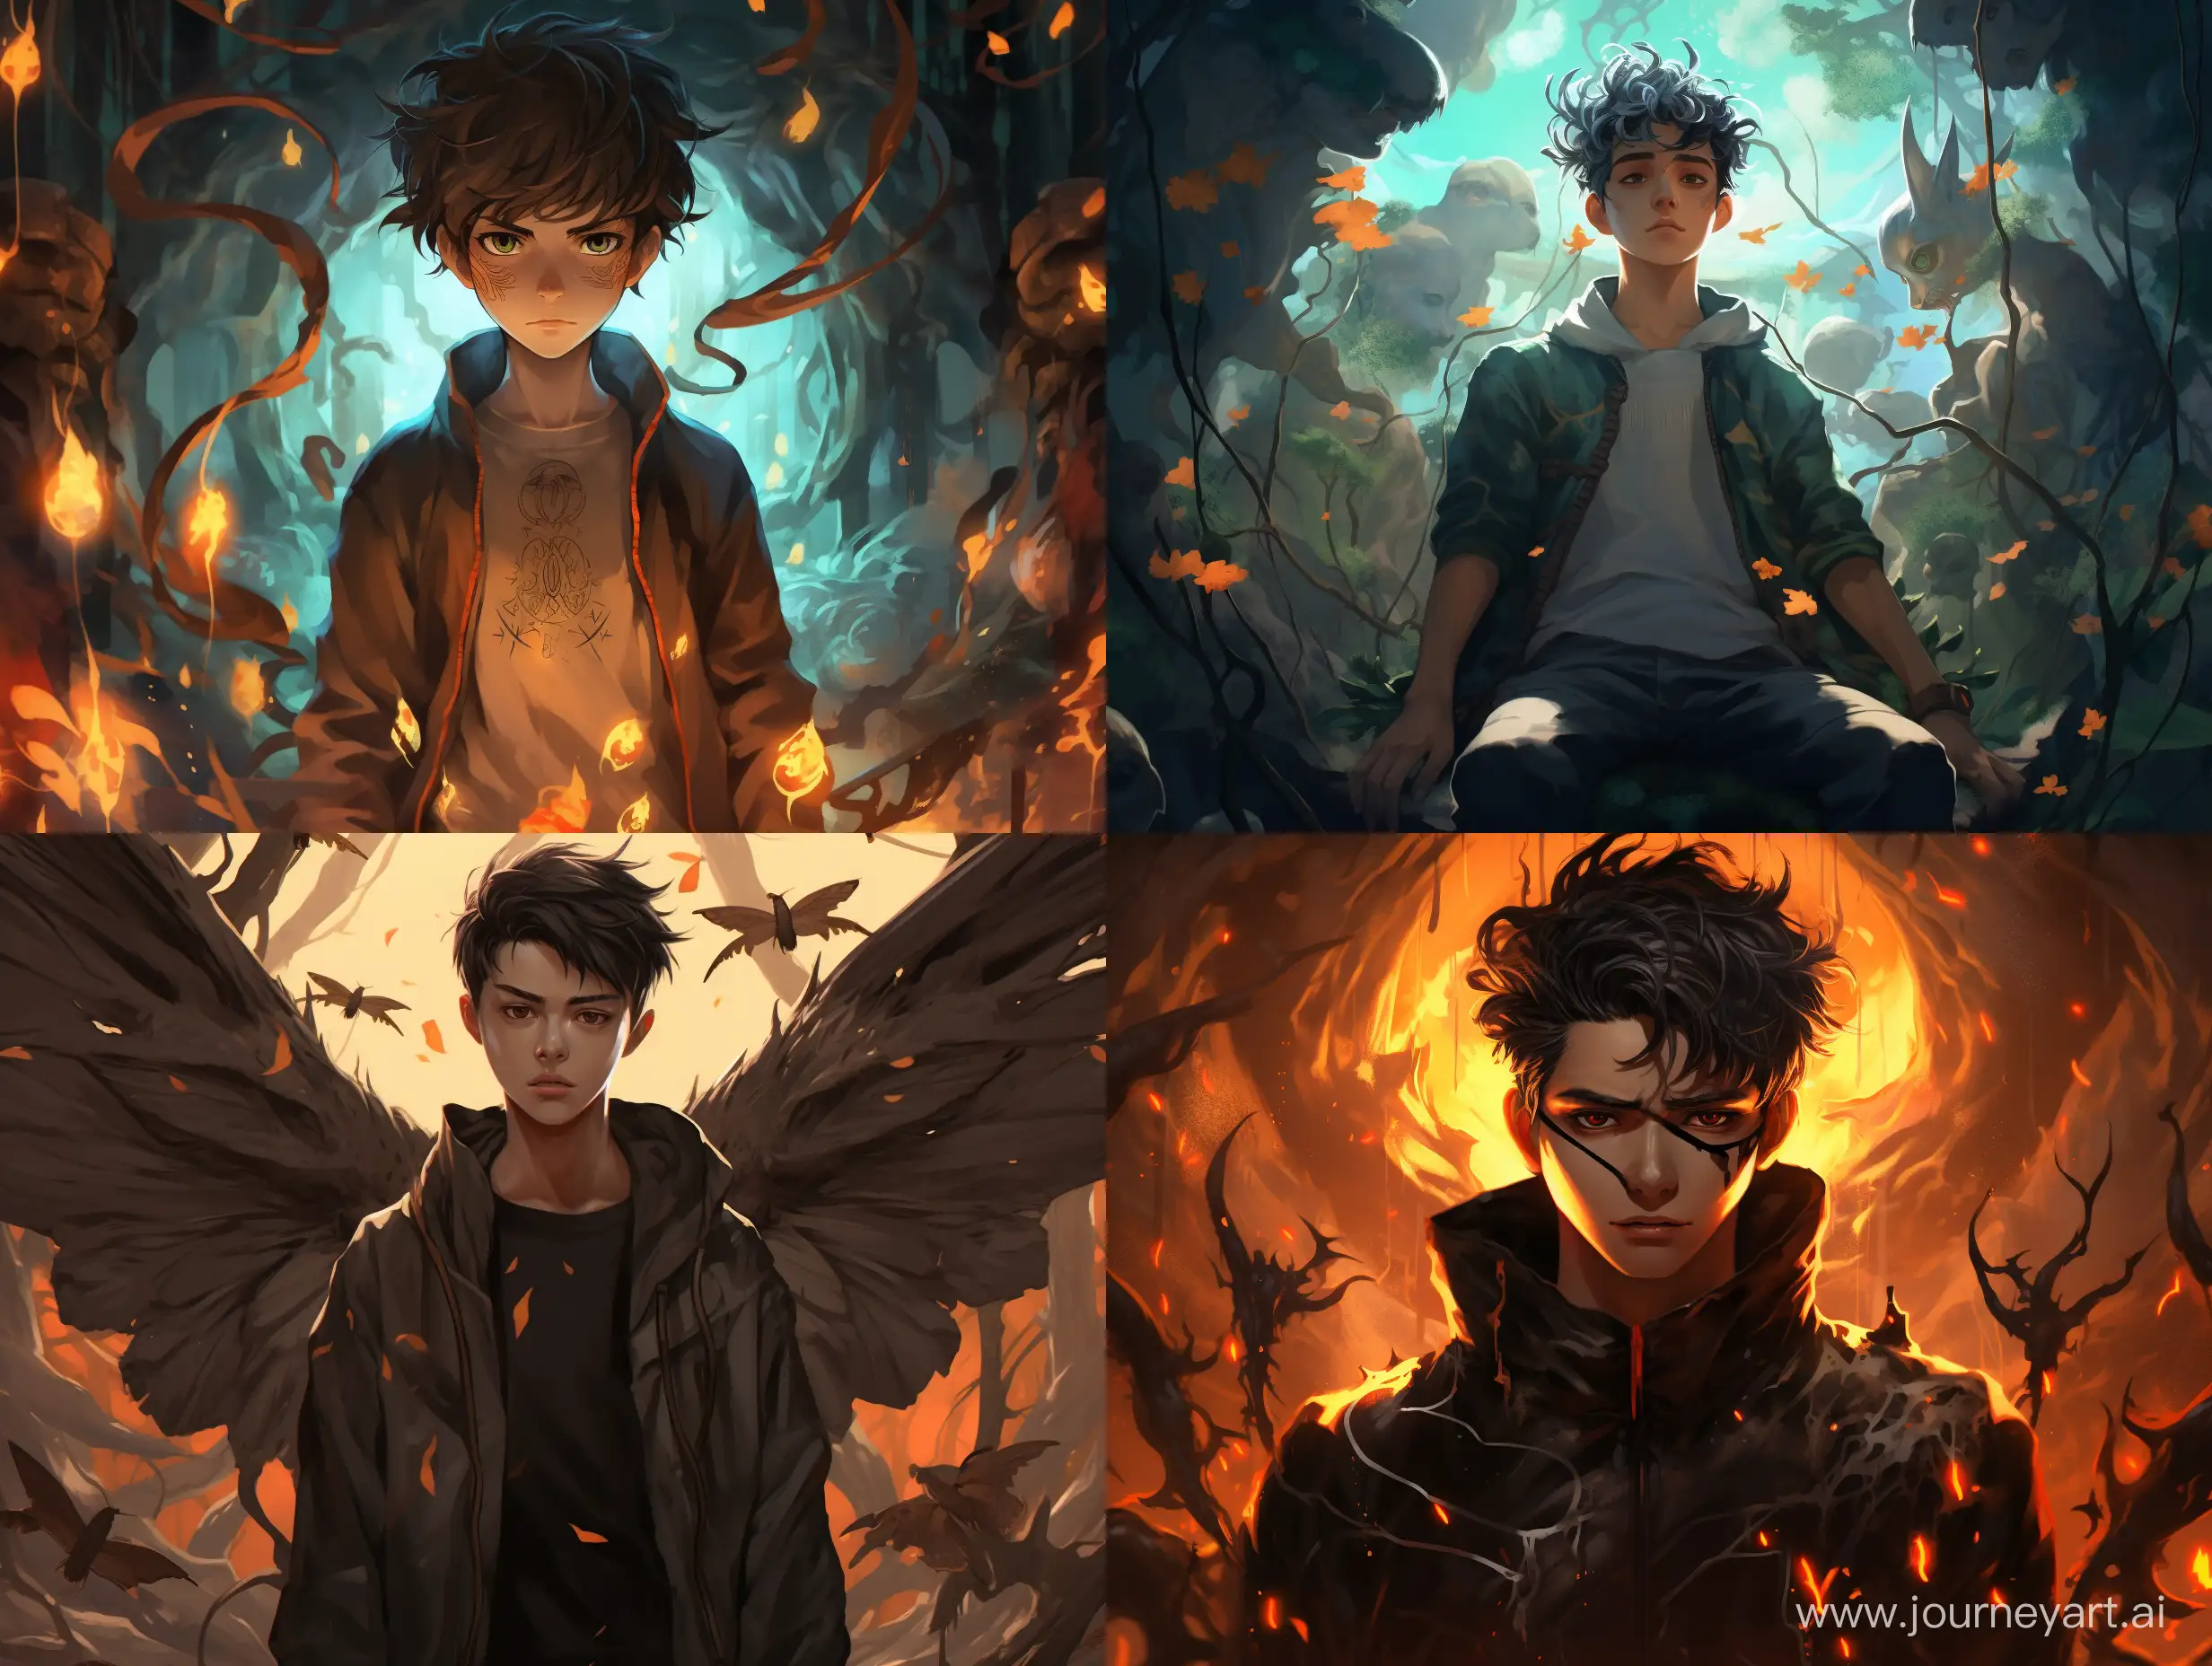 Create an anime character like Jack Hanma, who returned to earth from the underworld, add a blessing to the illustration
